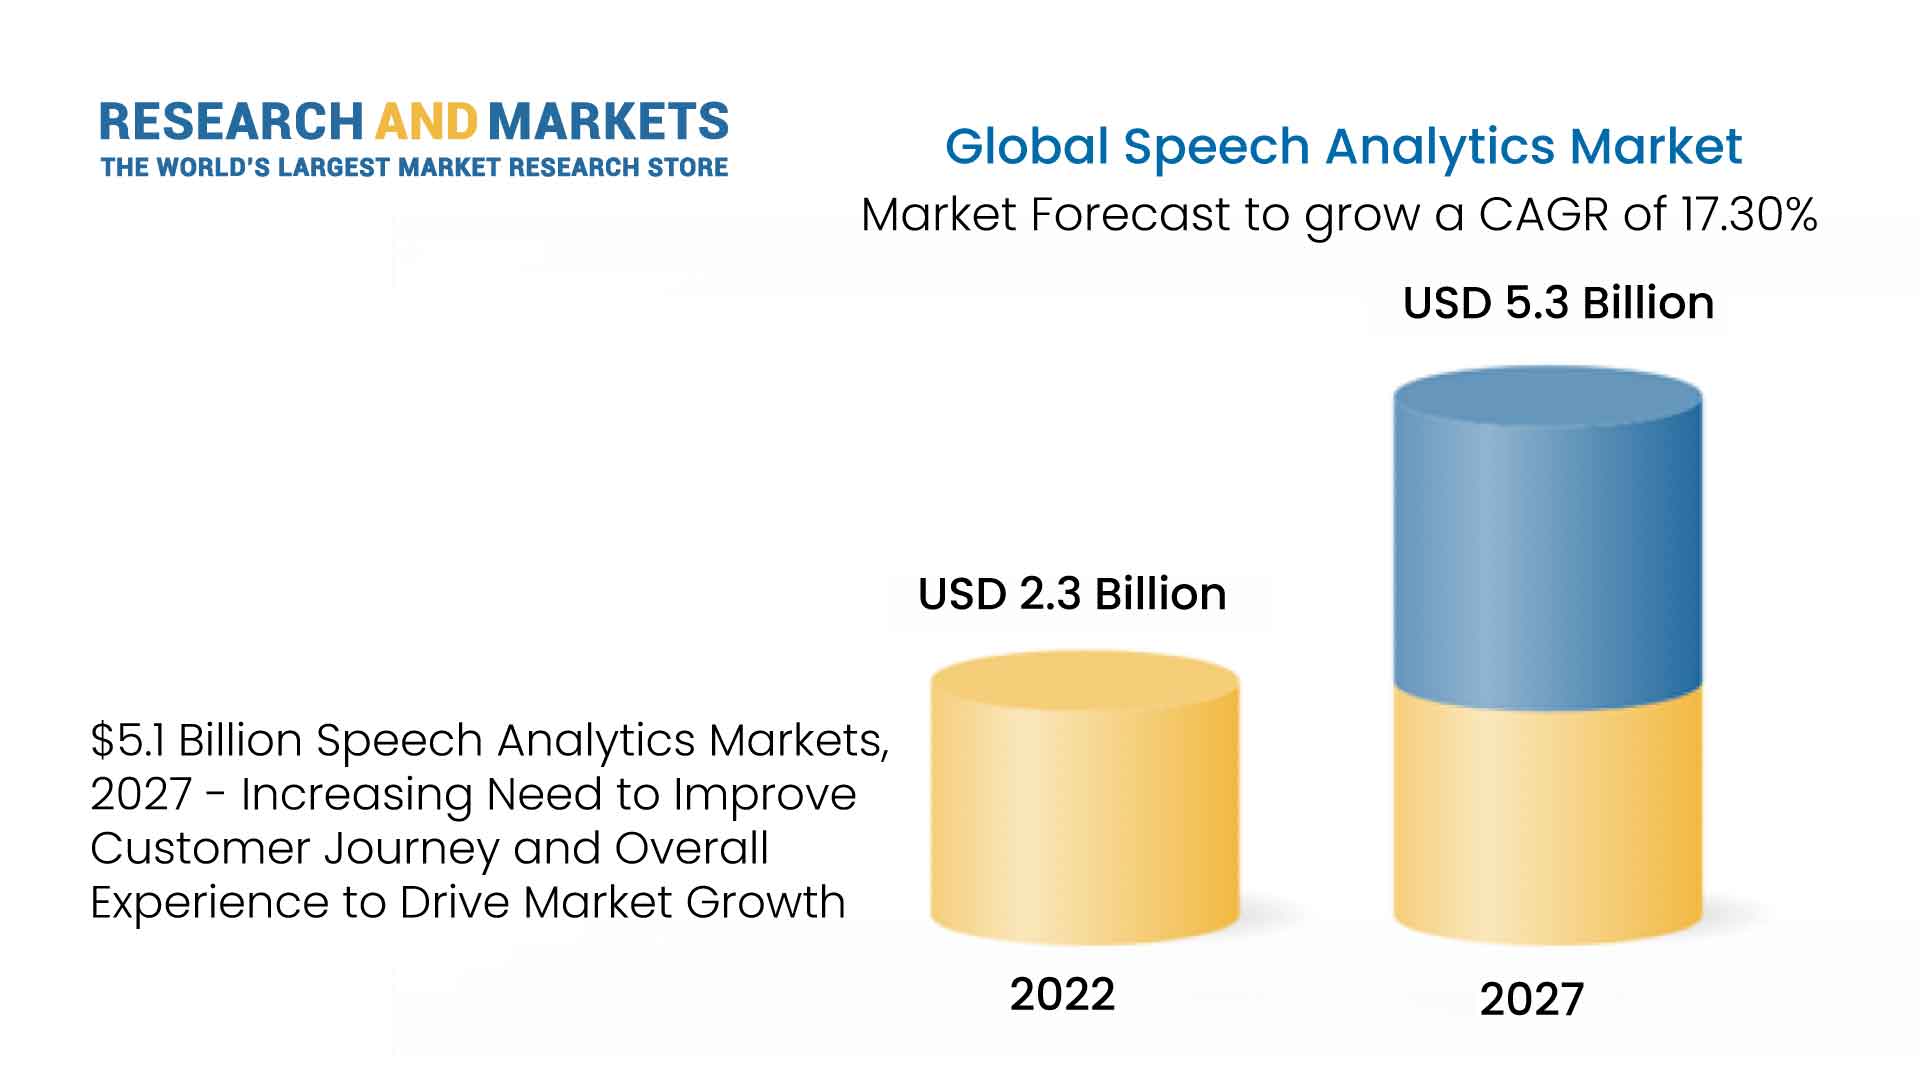 $5.1 Billion Speech Analytics Markets, 2027 - Increasing Need to Improve Customer Journey and Overall Experience to Drive Market Growth